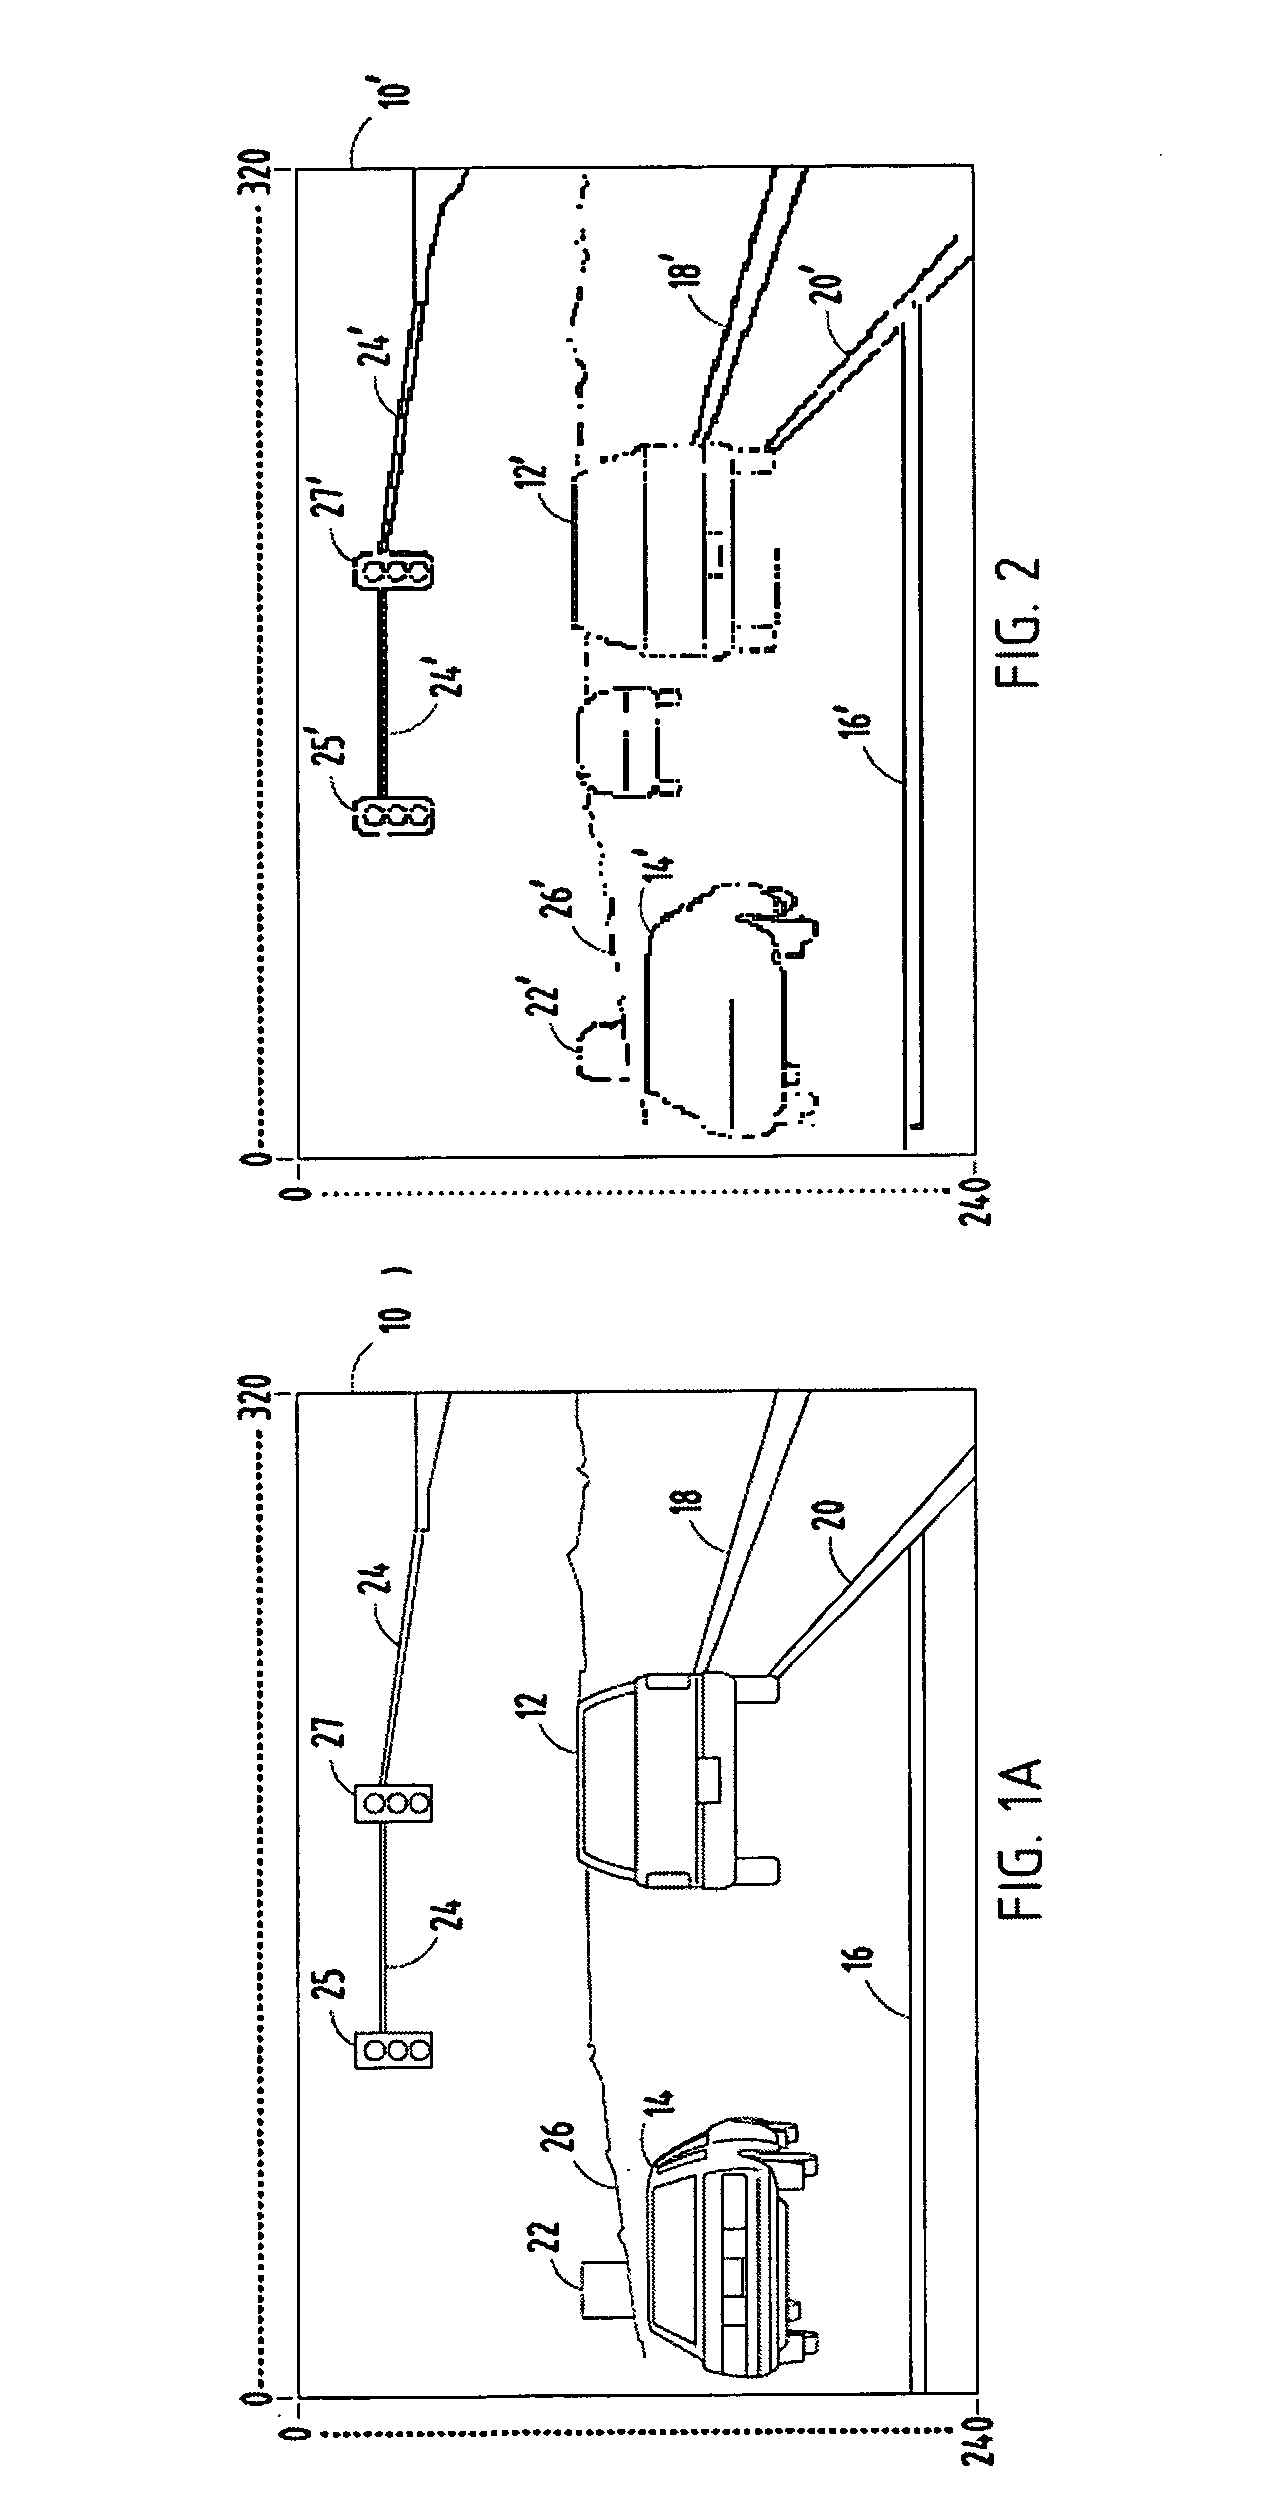 Method for identifying vehicles in electronic images